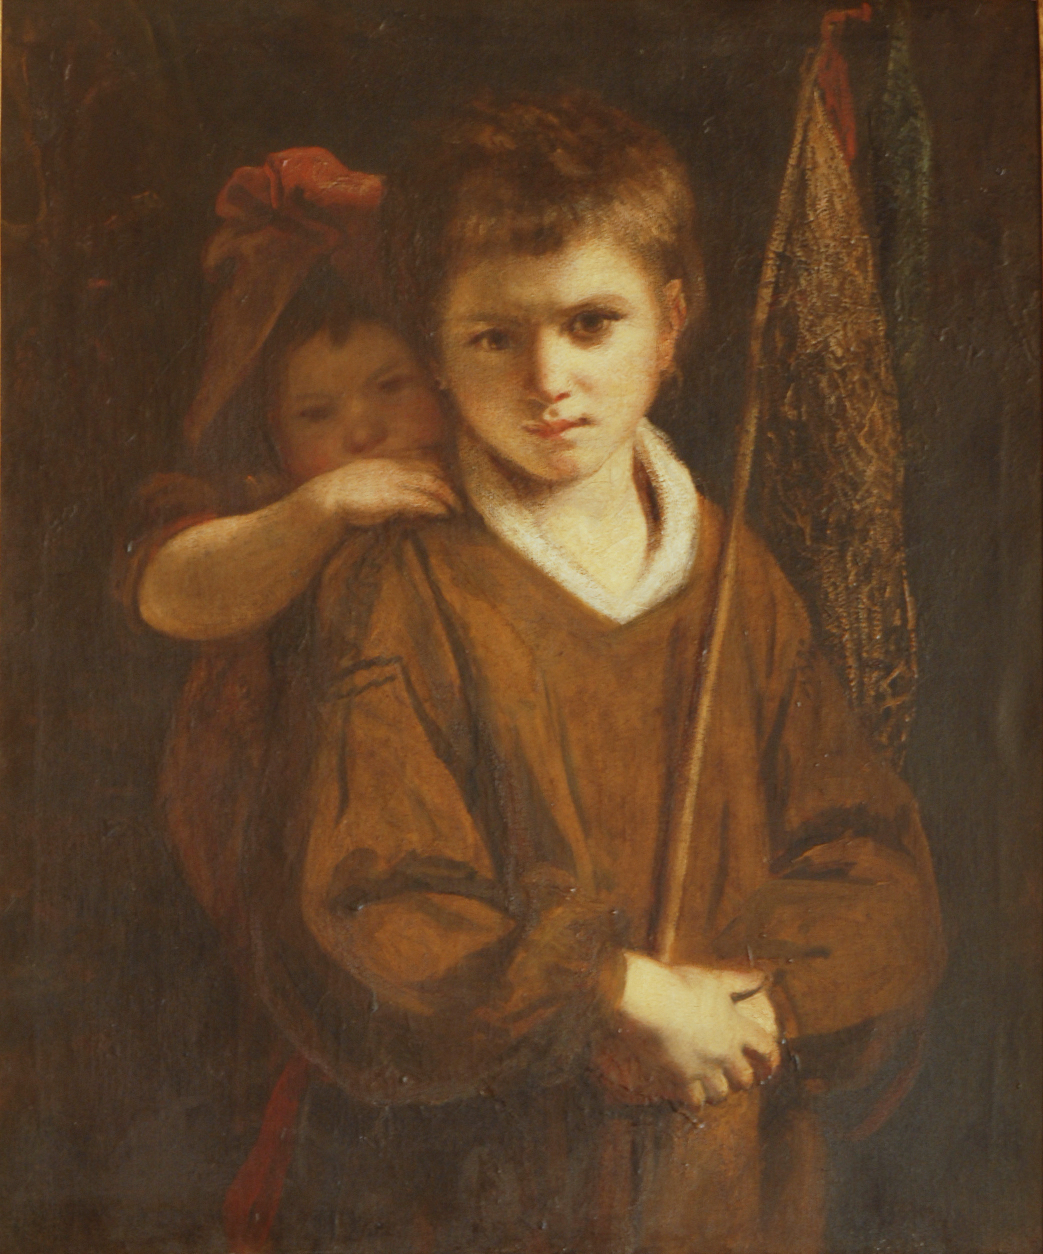 1775, oil on canvas, 76.2 x 63.5 cm. The Faringdon Collection Trust, Buscot Park. Mannings no. 2016. This image represents the exact object shown at the British Institution loan exhibition of 1823 as cat. no. 4, <i>Boy with Cabbage Nets</i>